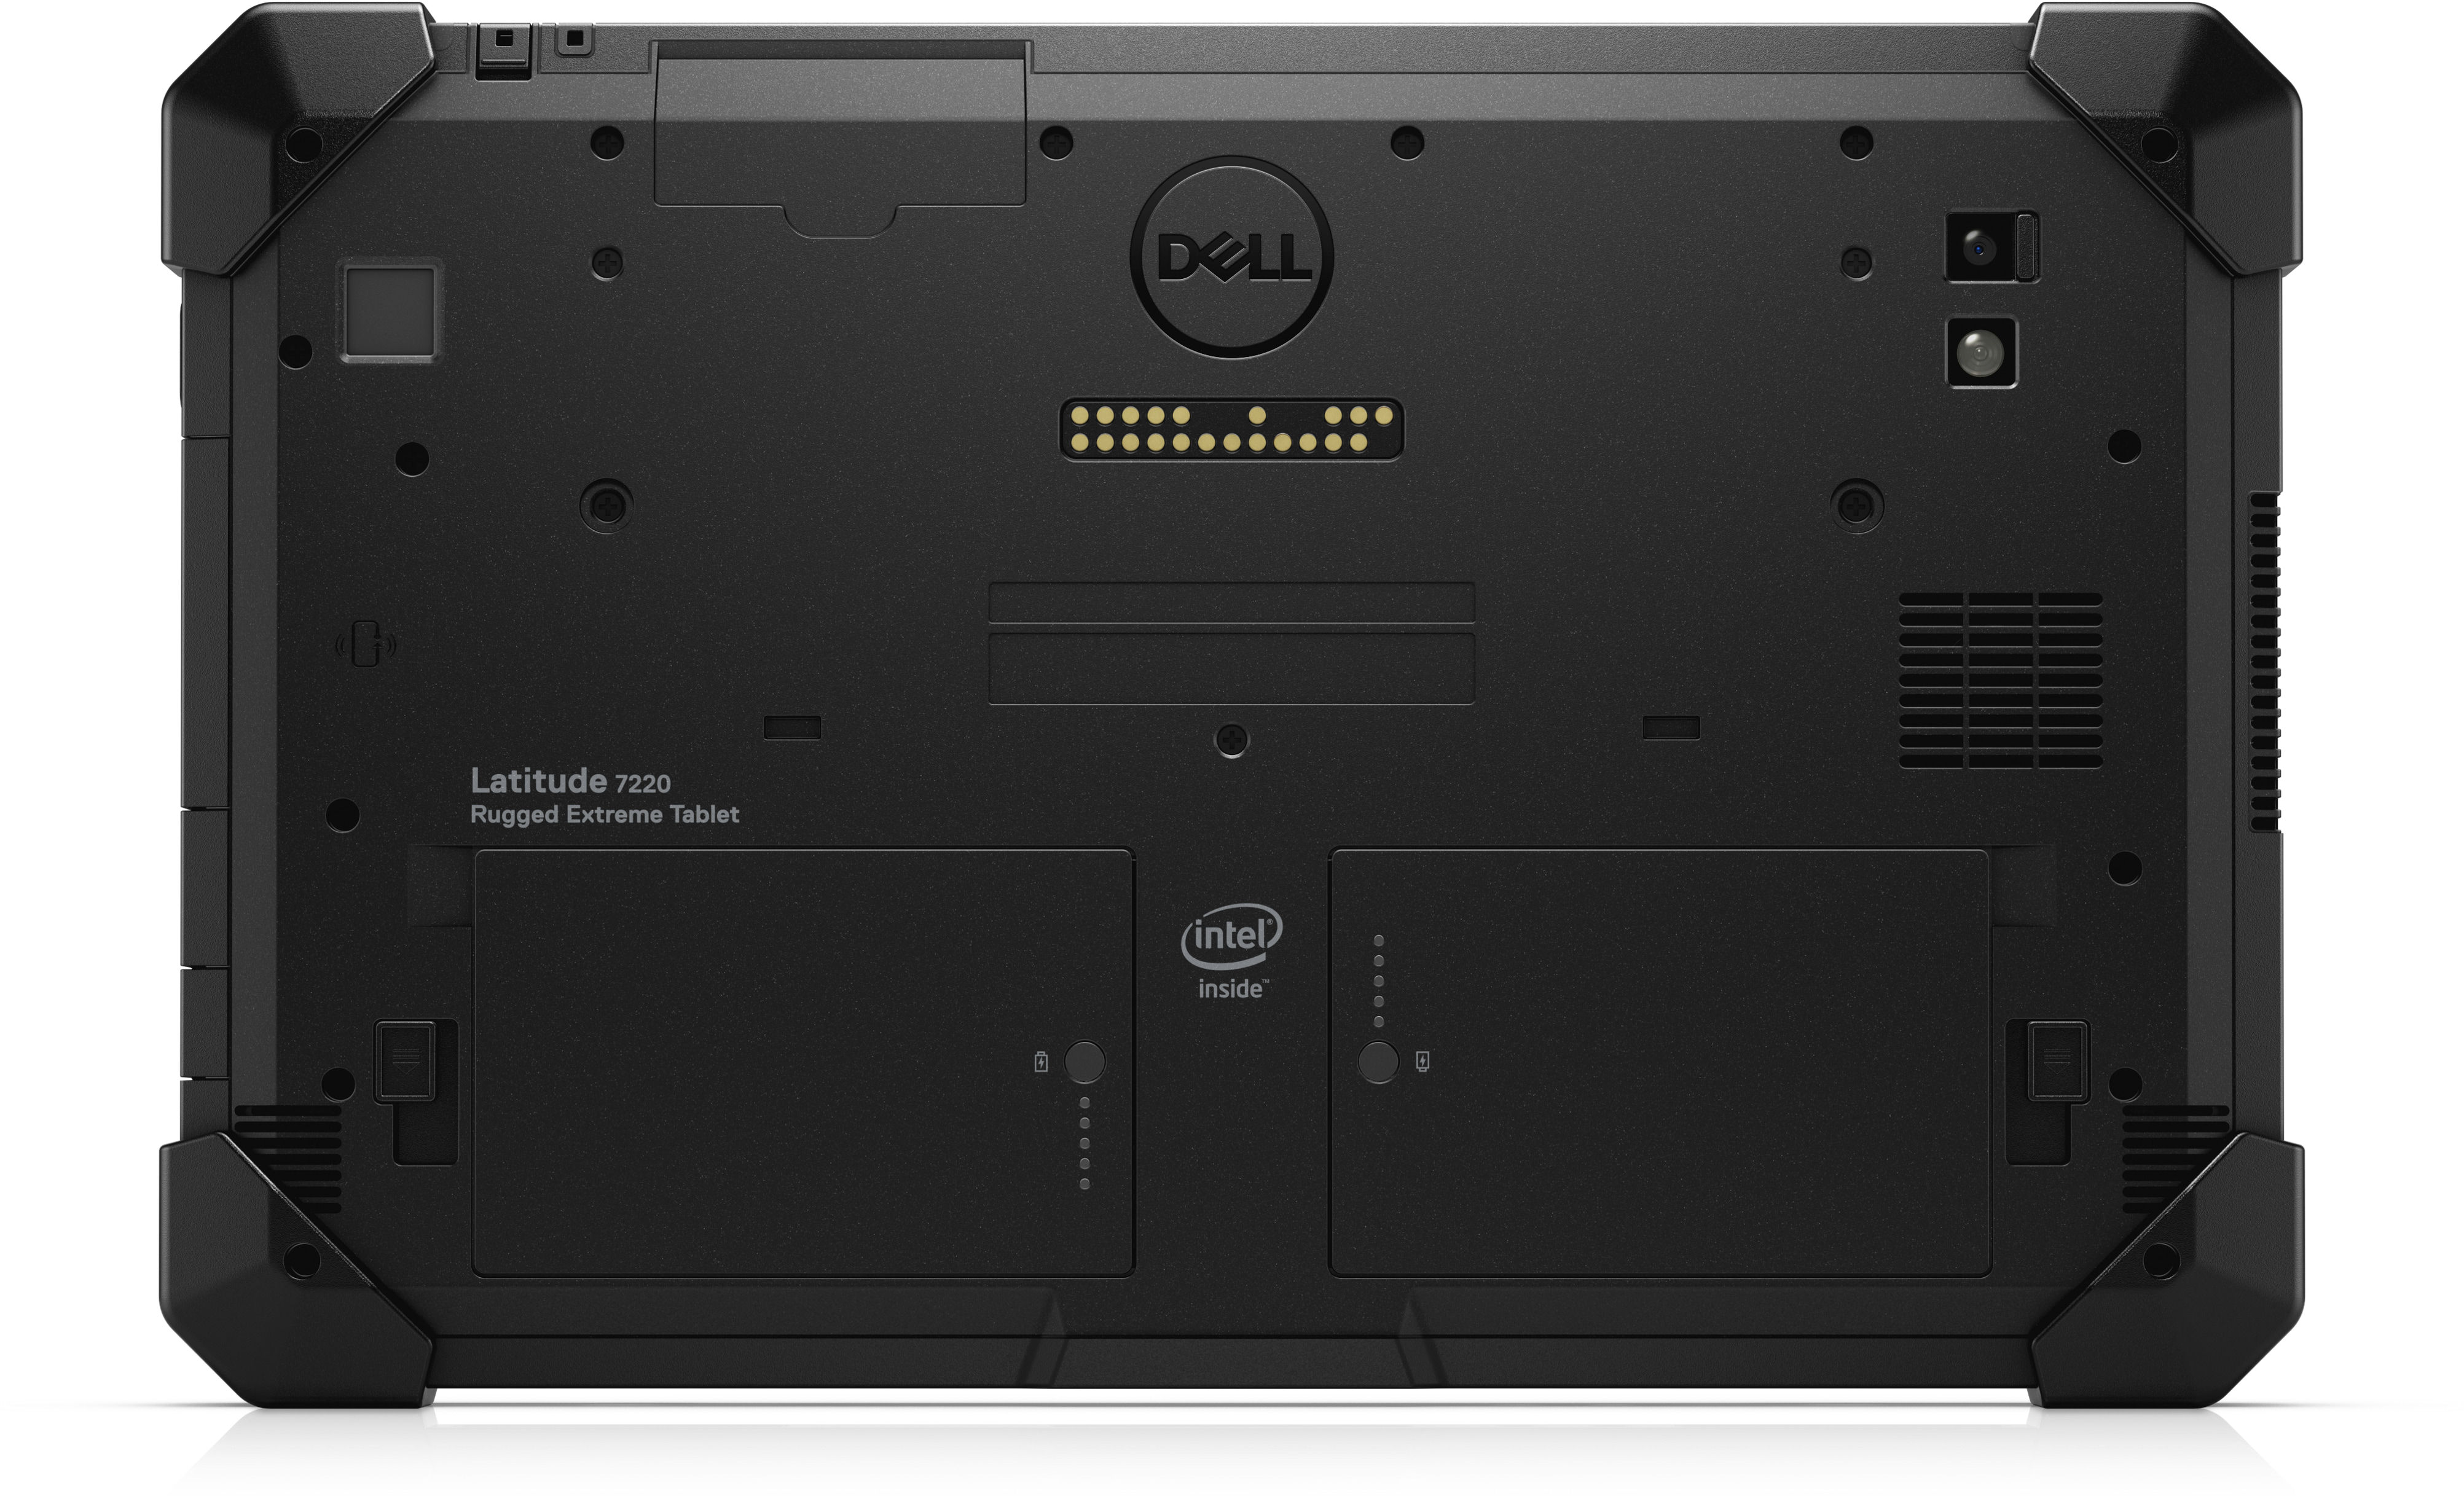 Dell Latitude 7220 Business Tablet with Intel Core i3 | Dell UK